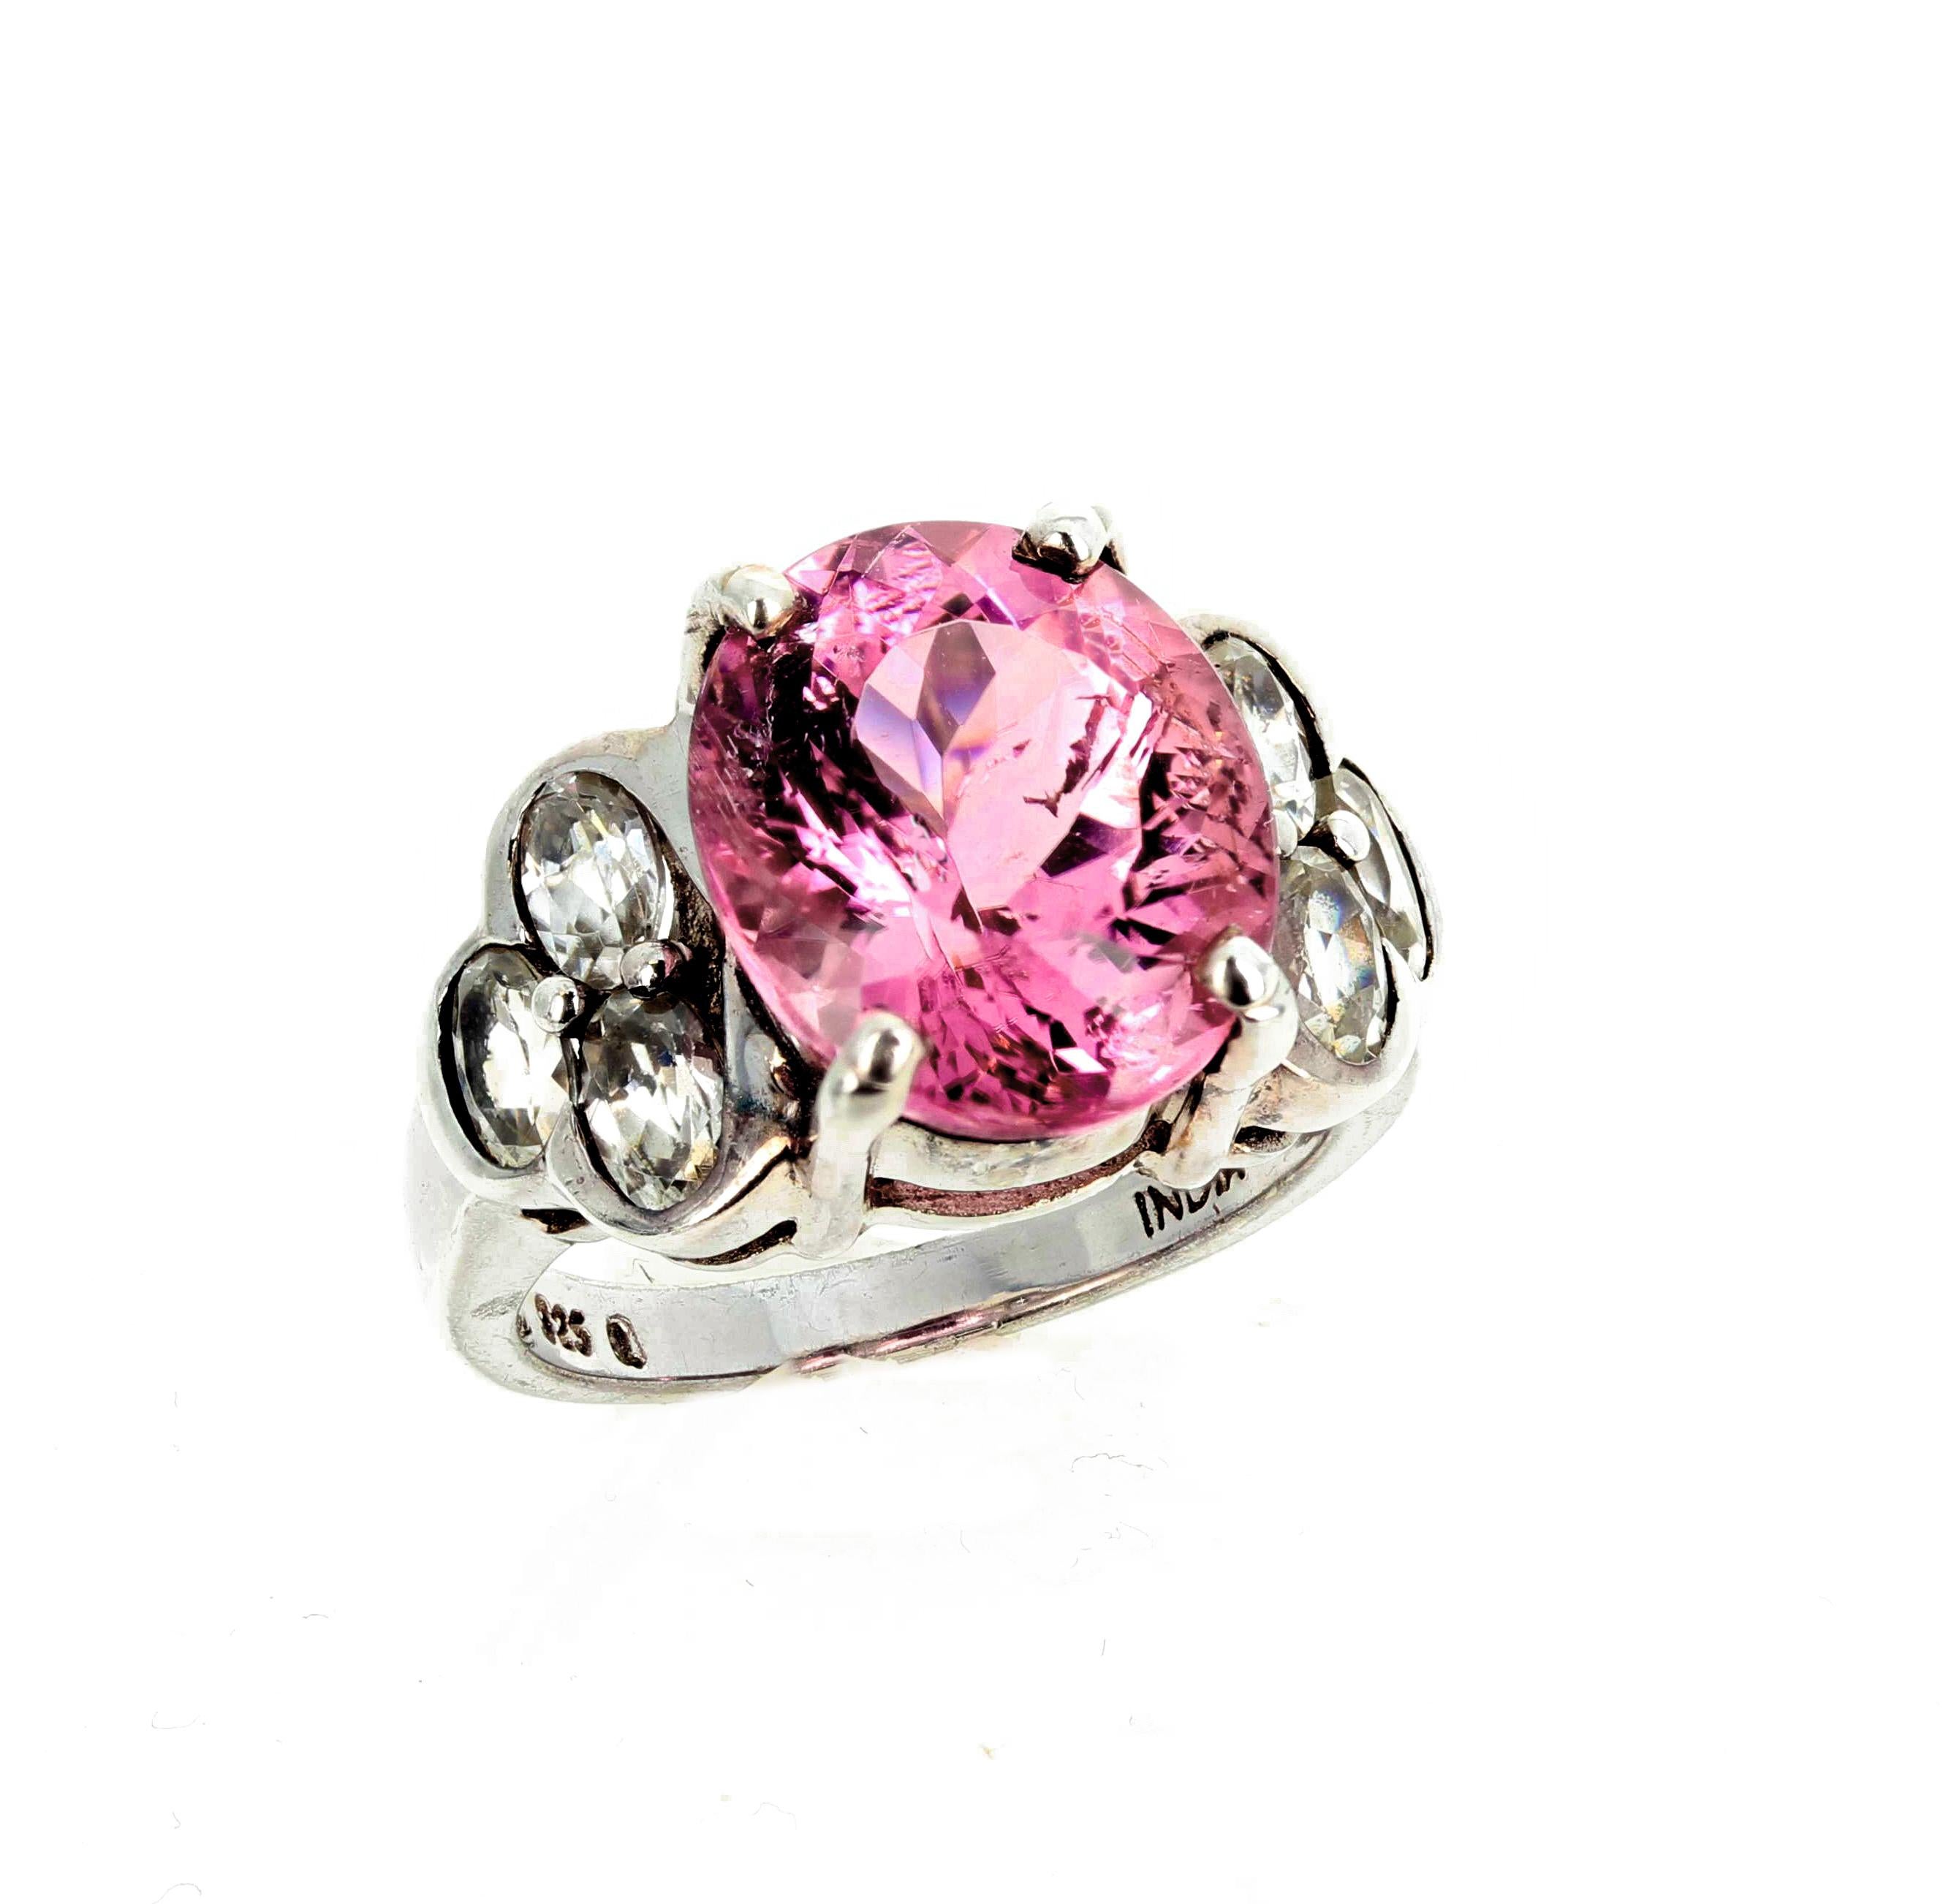 Unique 4 carat glittering pink tourmaline (12.5 mm x 6.5 mm) enhanced with sparkling silver quartz gemstones set in a lovely Sterling Silver ring size 7 (sizable for free). Spectacular optical effect in the Tourmaline exhibits brilliant reflections